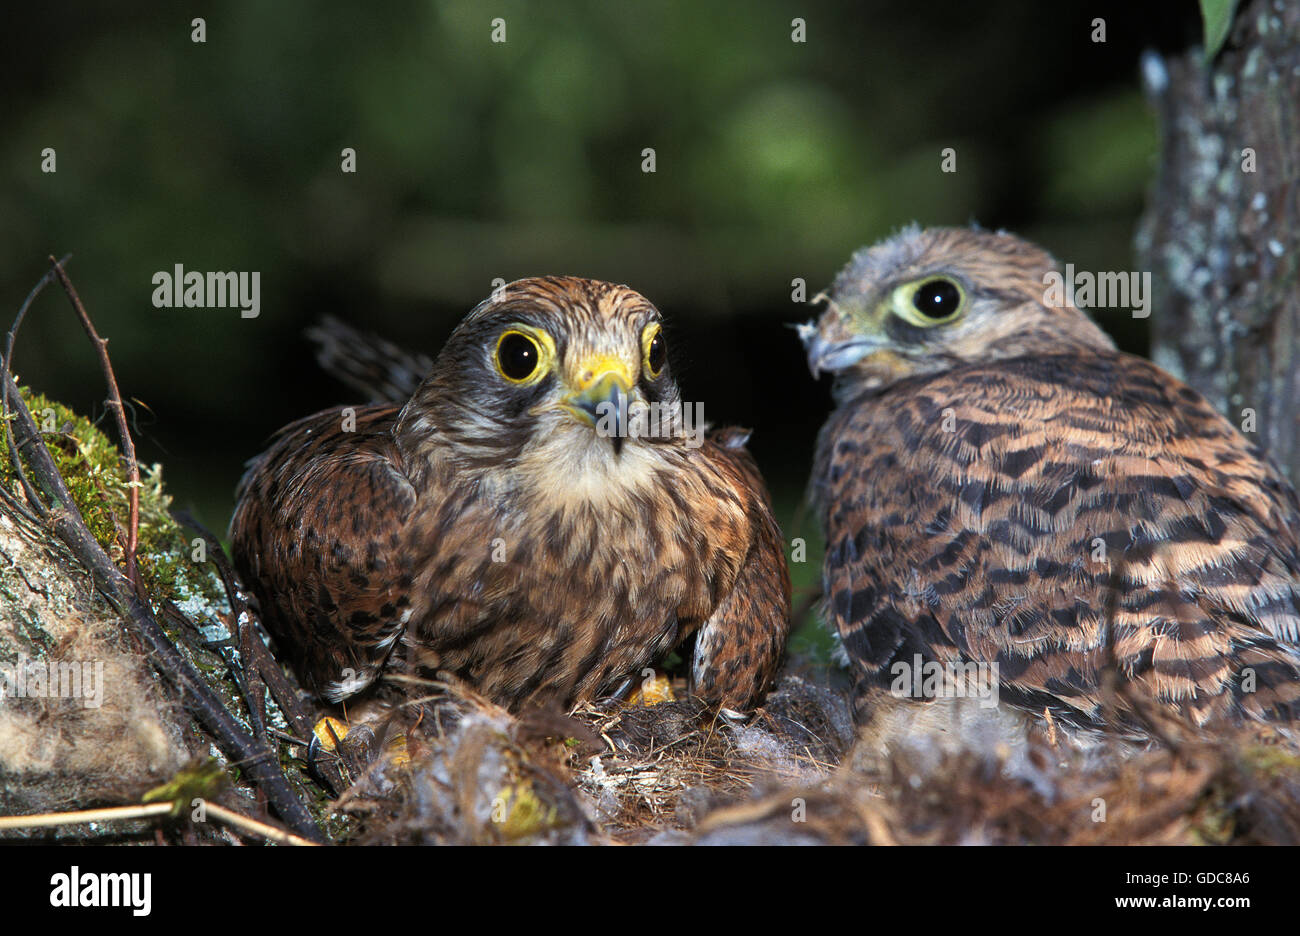 Common Kestrel, falco tinnunculus, Adult and Chick at Nest Stock Photo